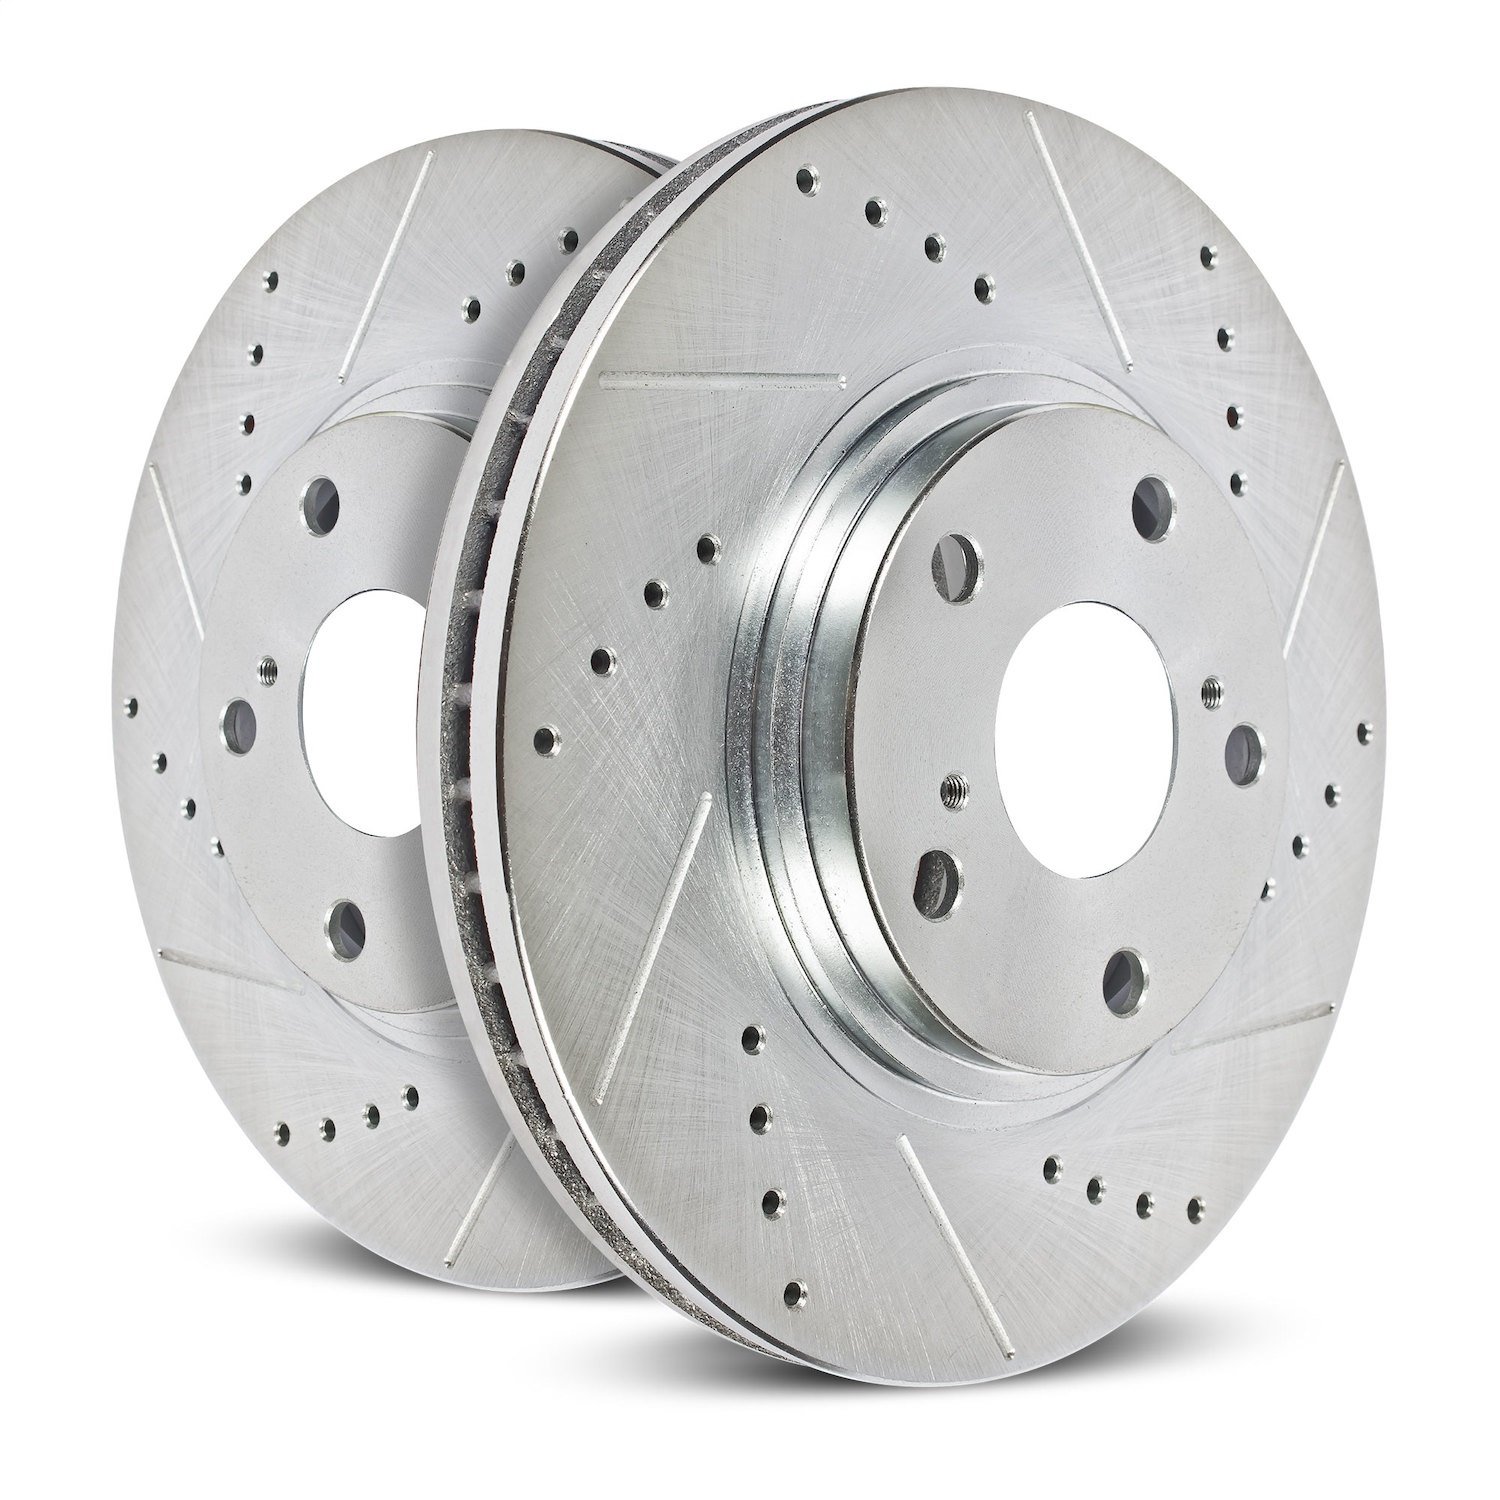 Extreme Performance Drilled And Slotted Front Brake Rotor Fits Late Model Ram 1500 [Right/Passenger Side]